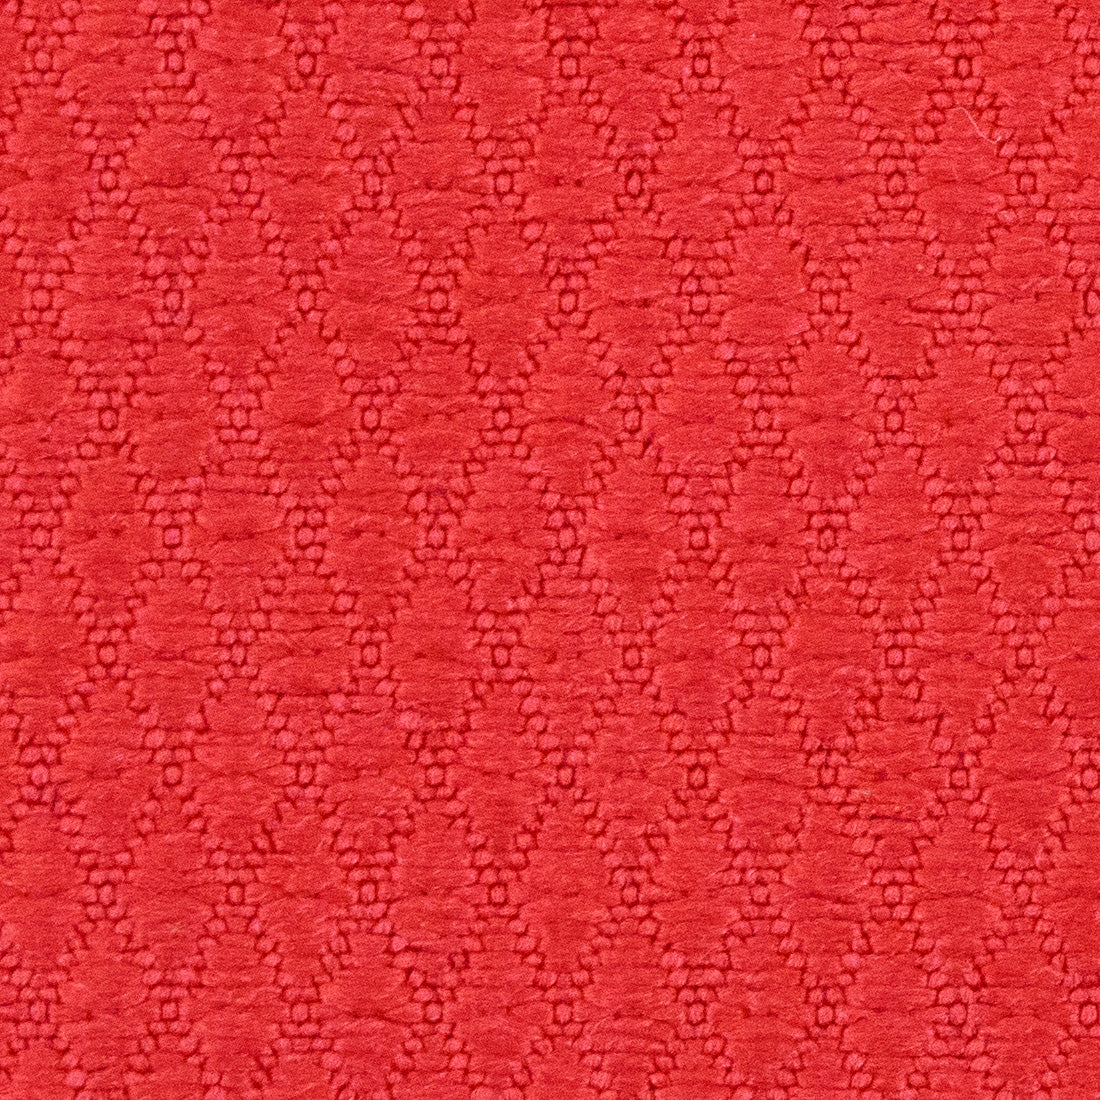 XERO Fish Scale Towel Ruby Close Up View